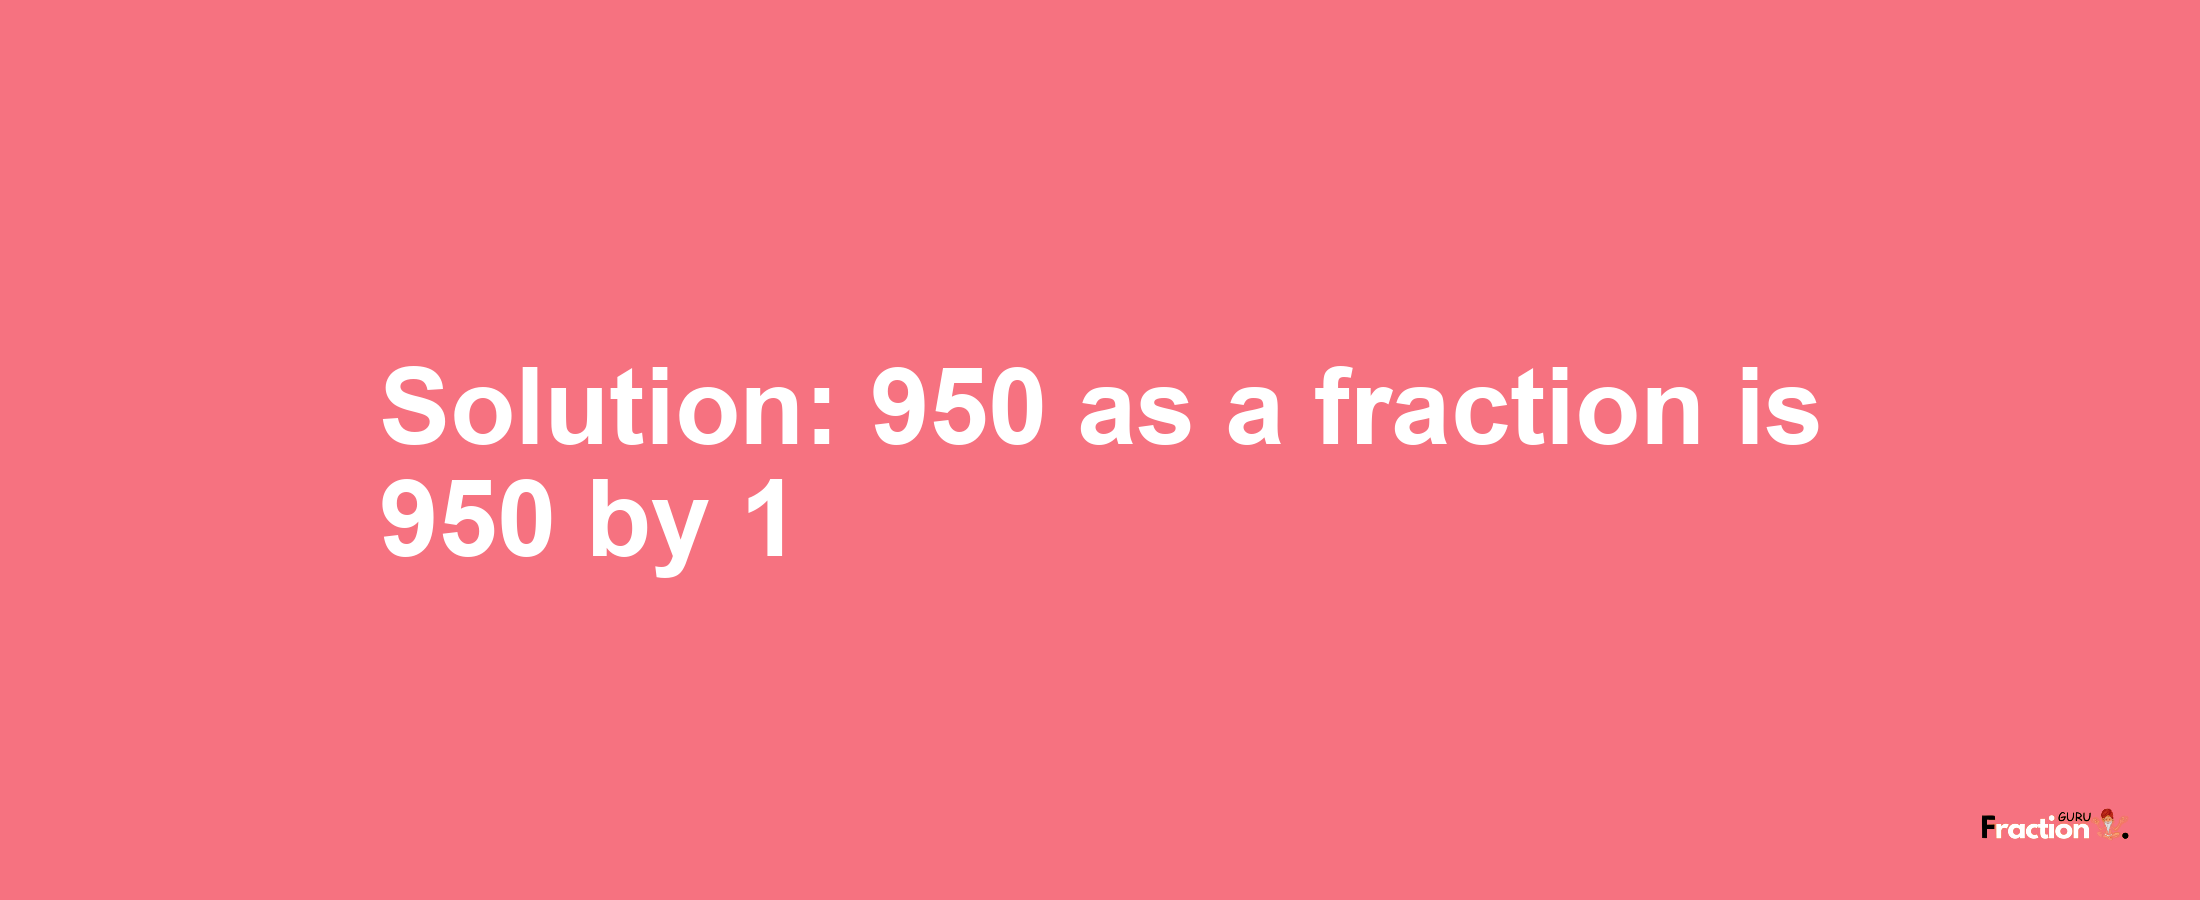 Solution:950 as a fraction is 950/1